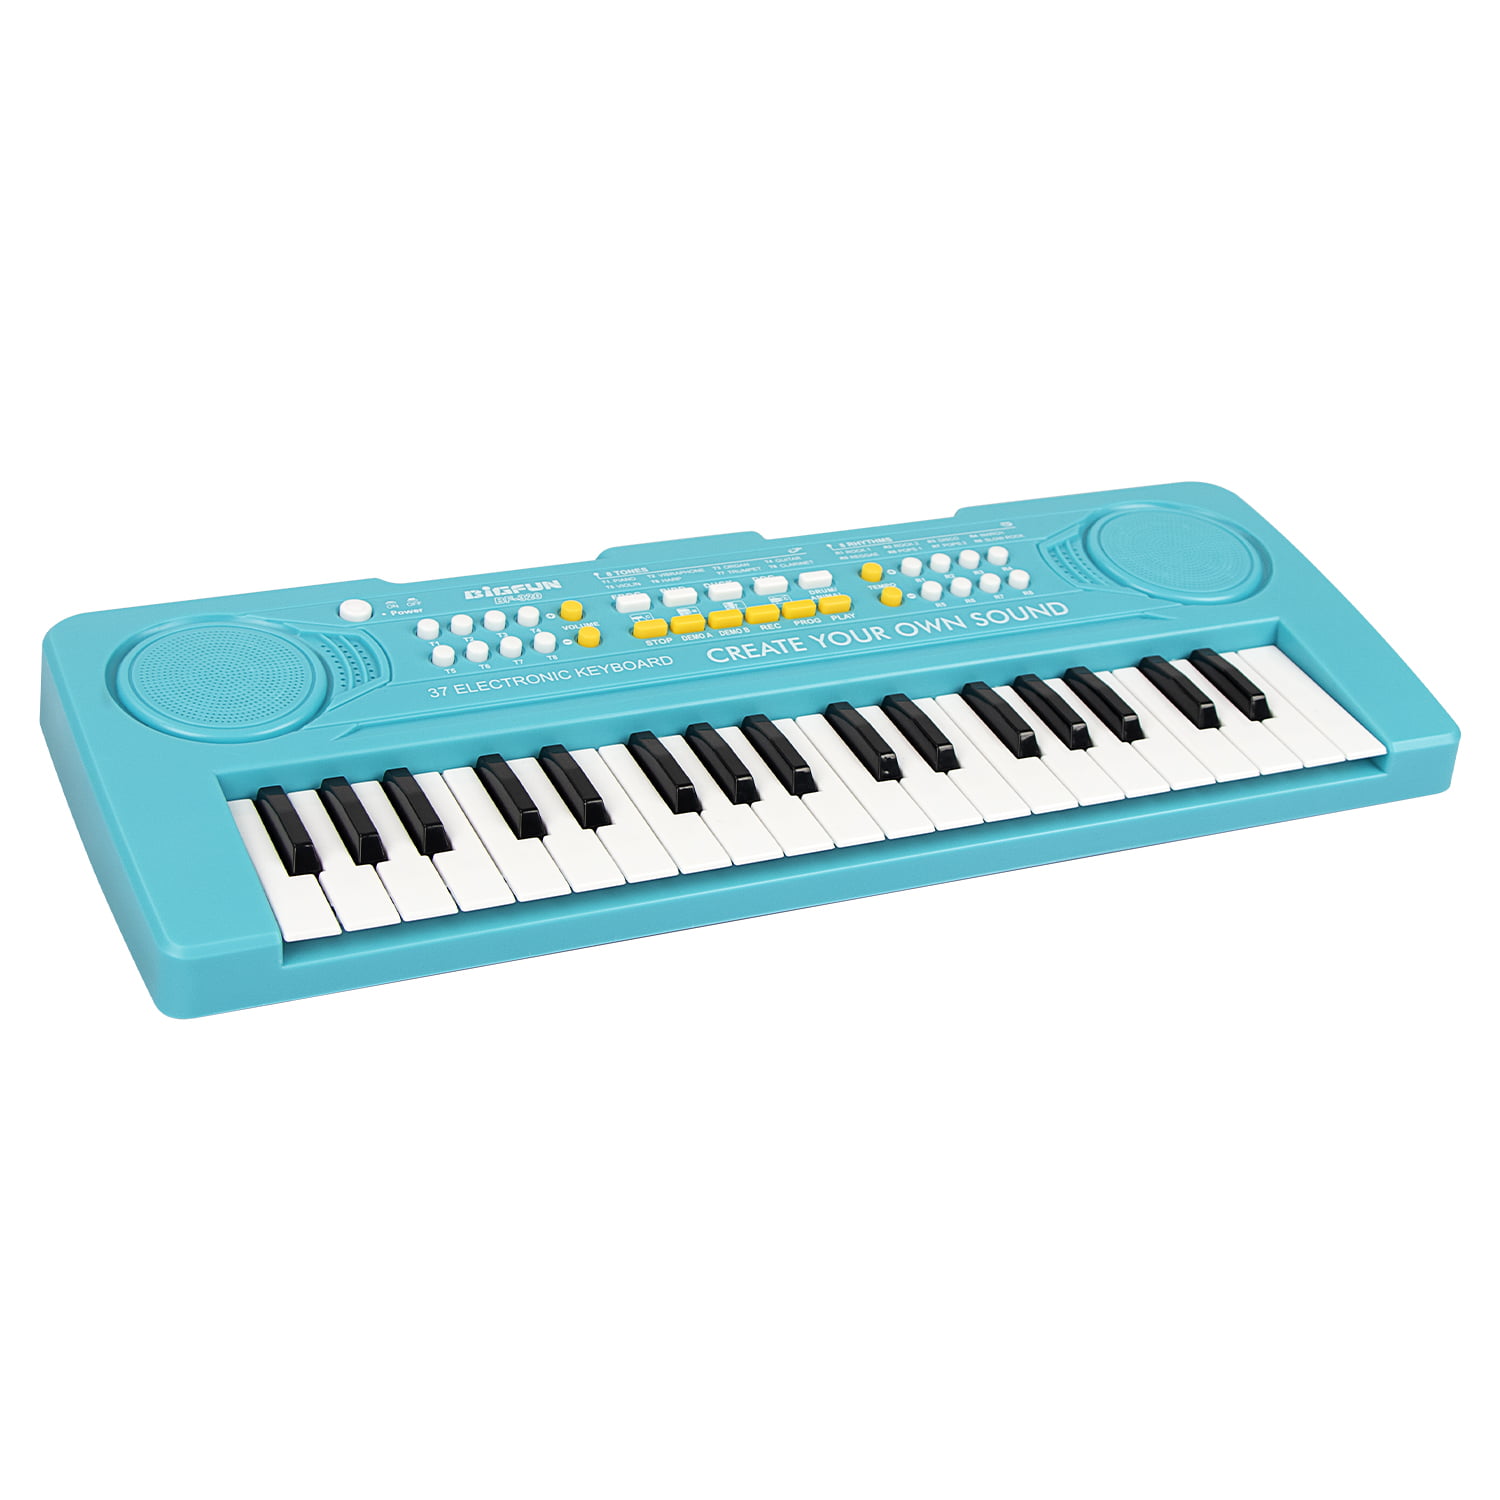 AIMEDYOU 37 Keys Kids Piano Keyboard Portable Electronic Musical Instrument Multi-Function Music Keyboard Early Learning Educational Toy Birthday Xmas Day Gifts for Kids Blue 